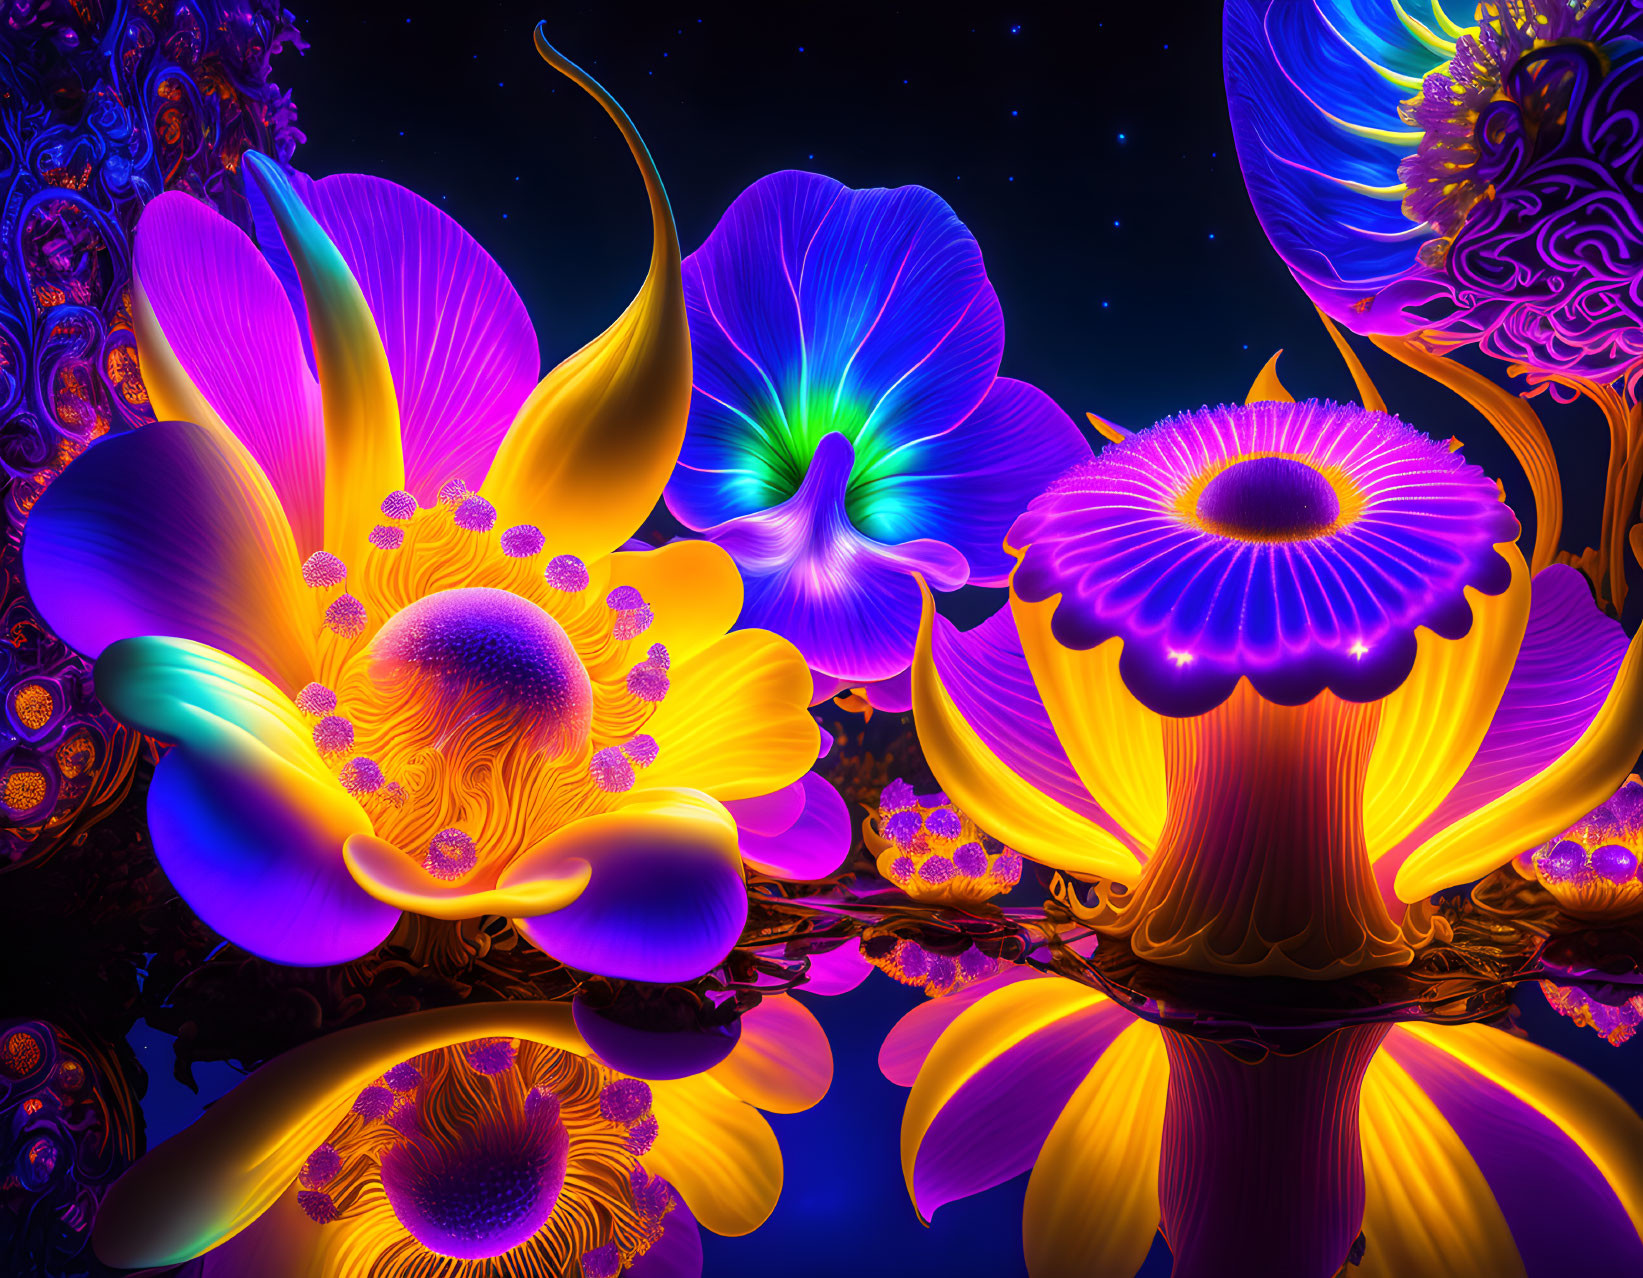 Neon-colored flowers on glossy surface under starry night